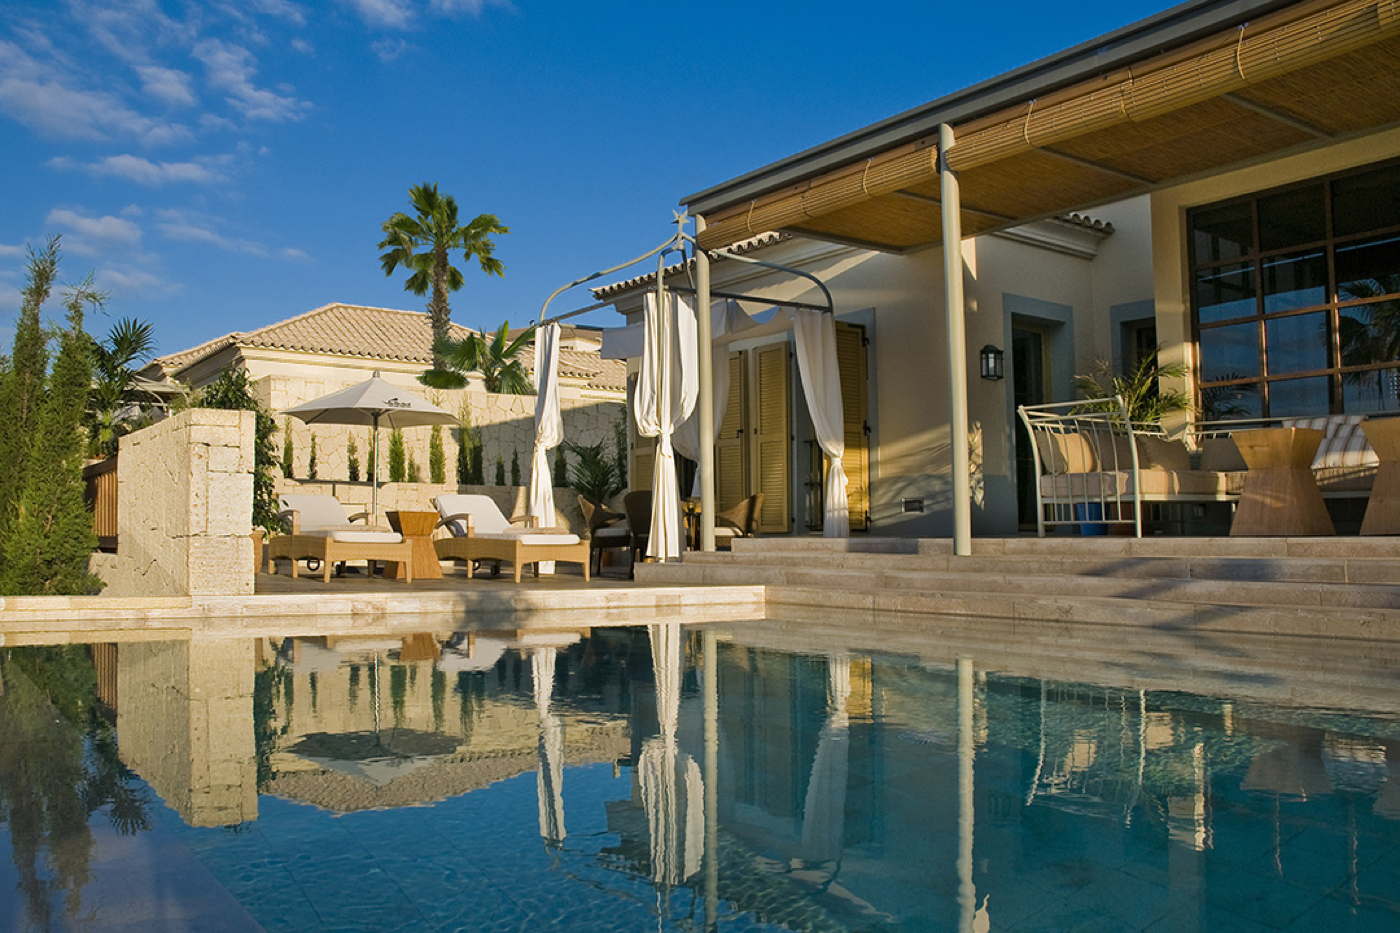 luxury and design hotelvilla-in Spain-Canary Islands-Teneriffe-heated infinity pool